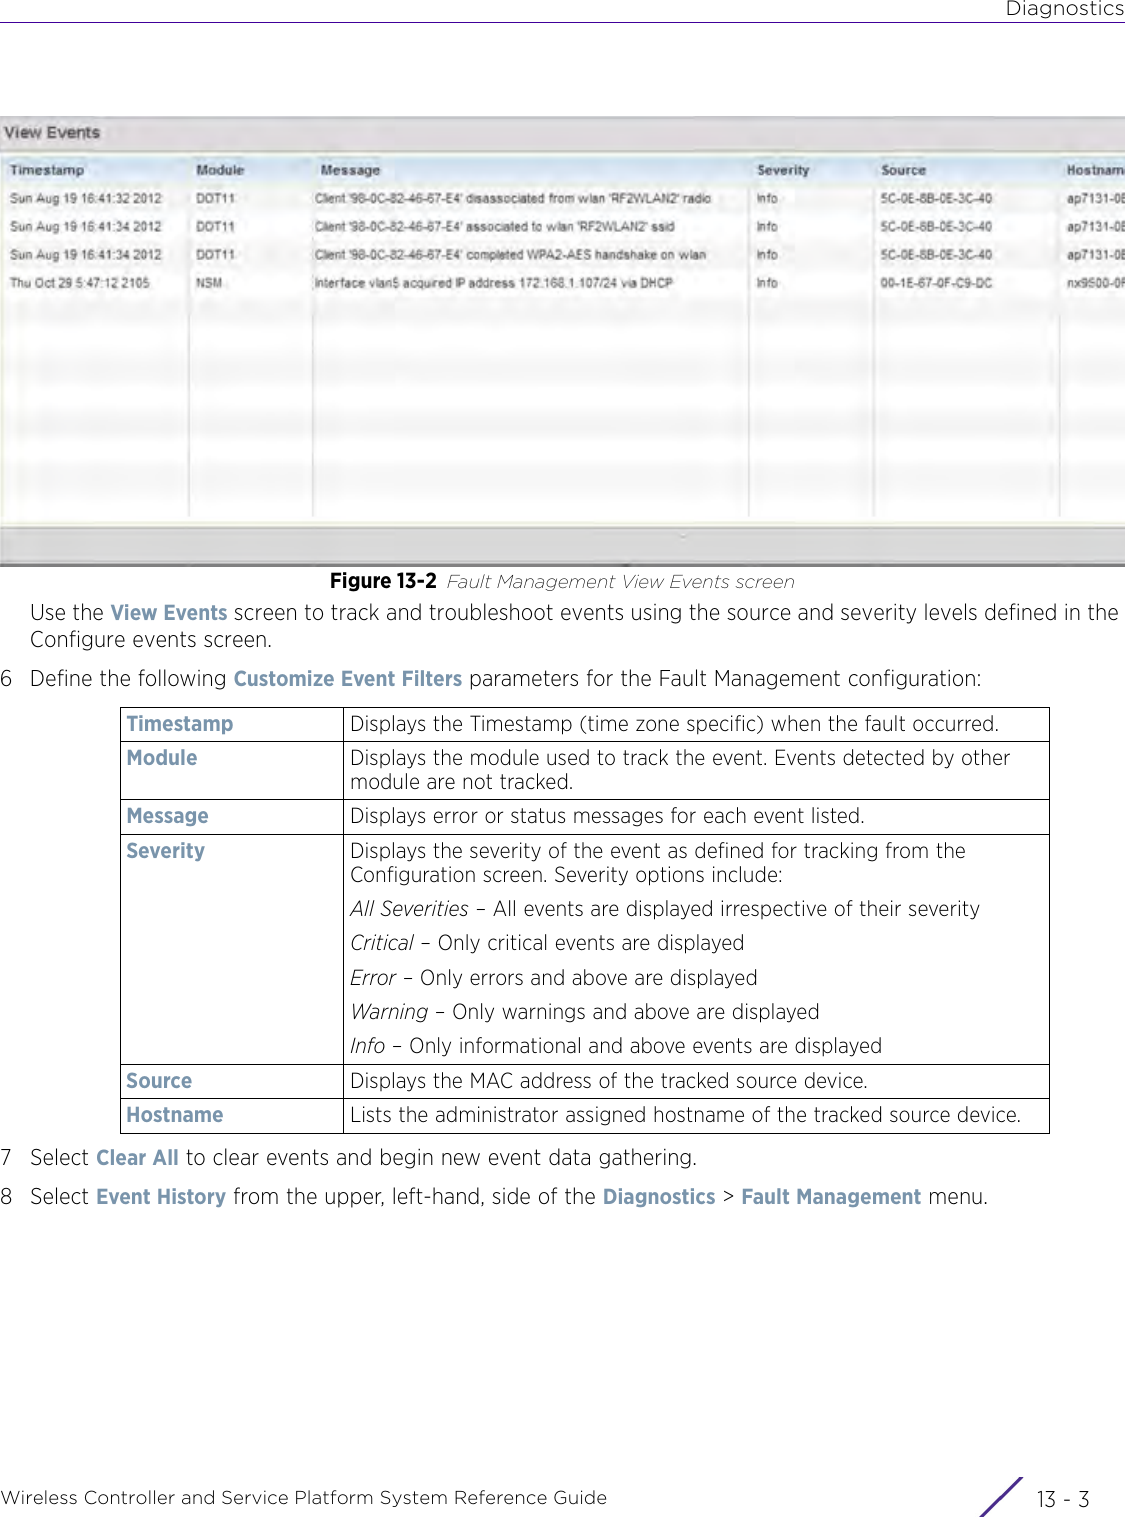 DiagnosticsWireless Controller and Service Platform System Reference Guide 13 - 3Figure 13-2 Fault Management View Events screenUse the View Events screen to track and troubleshoot events using the source and severity levels defined in the Configure events screen. 6 Define the following Customize Event Filters parameters for the Fault Management configuration:7Select Clear All to clear events and begin new event data gathering.8Select Event History from the upper, left-hand, side of the Diagnostics &gt; Fault Management menu.Timestamp Displays the Timestamp (time zone specific) when the fault occurred.Module Displays the module used to track the event. Events detected by other module are not tracked.Message Displays error or status messages for each event listed.Severity Displays the severity of the event as defined for tracking from the Configuration screen. Severity options include:All Severities – All events are displayed irrespective of their severityCritical – Only critical events are displayedError – Only errors and above are displayedWarning – Only warnings and above are displayedInfo – Only informational and above events are displayedSource Displays the MAC address of the tracked source device.Hostname Lists the administrator assigned hostname of the tracked source device.